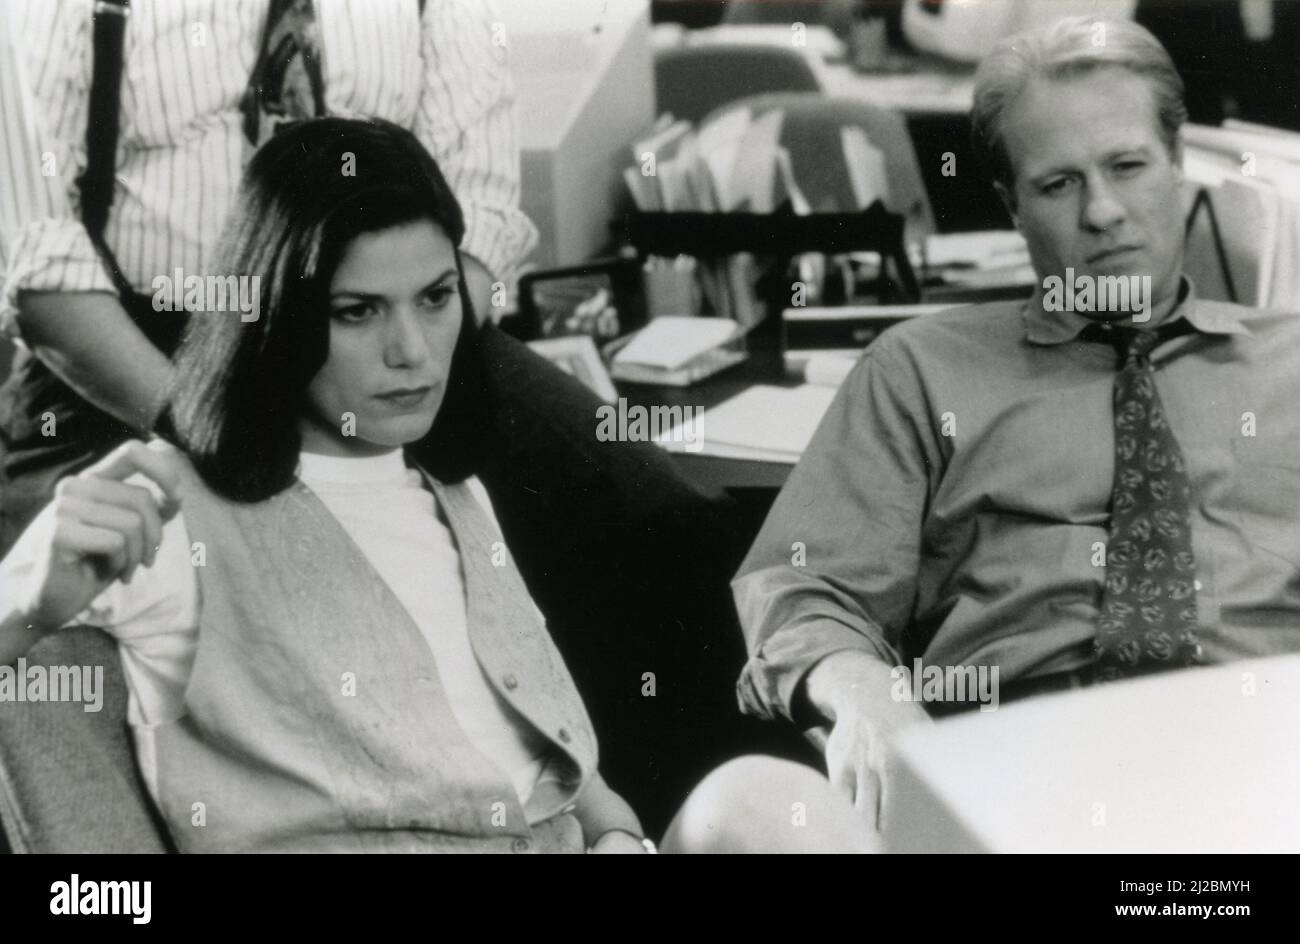 American actress Linda Fiorentino and actor Gregg Henry in the movie Bodily Harm, USA 1994 Stock Photo